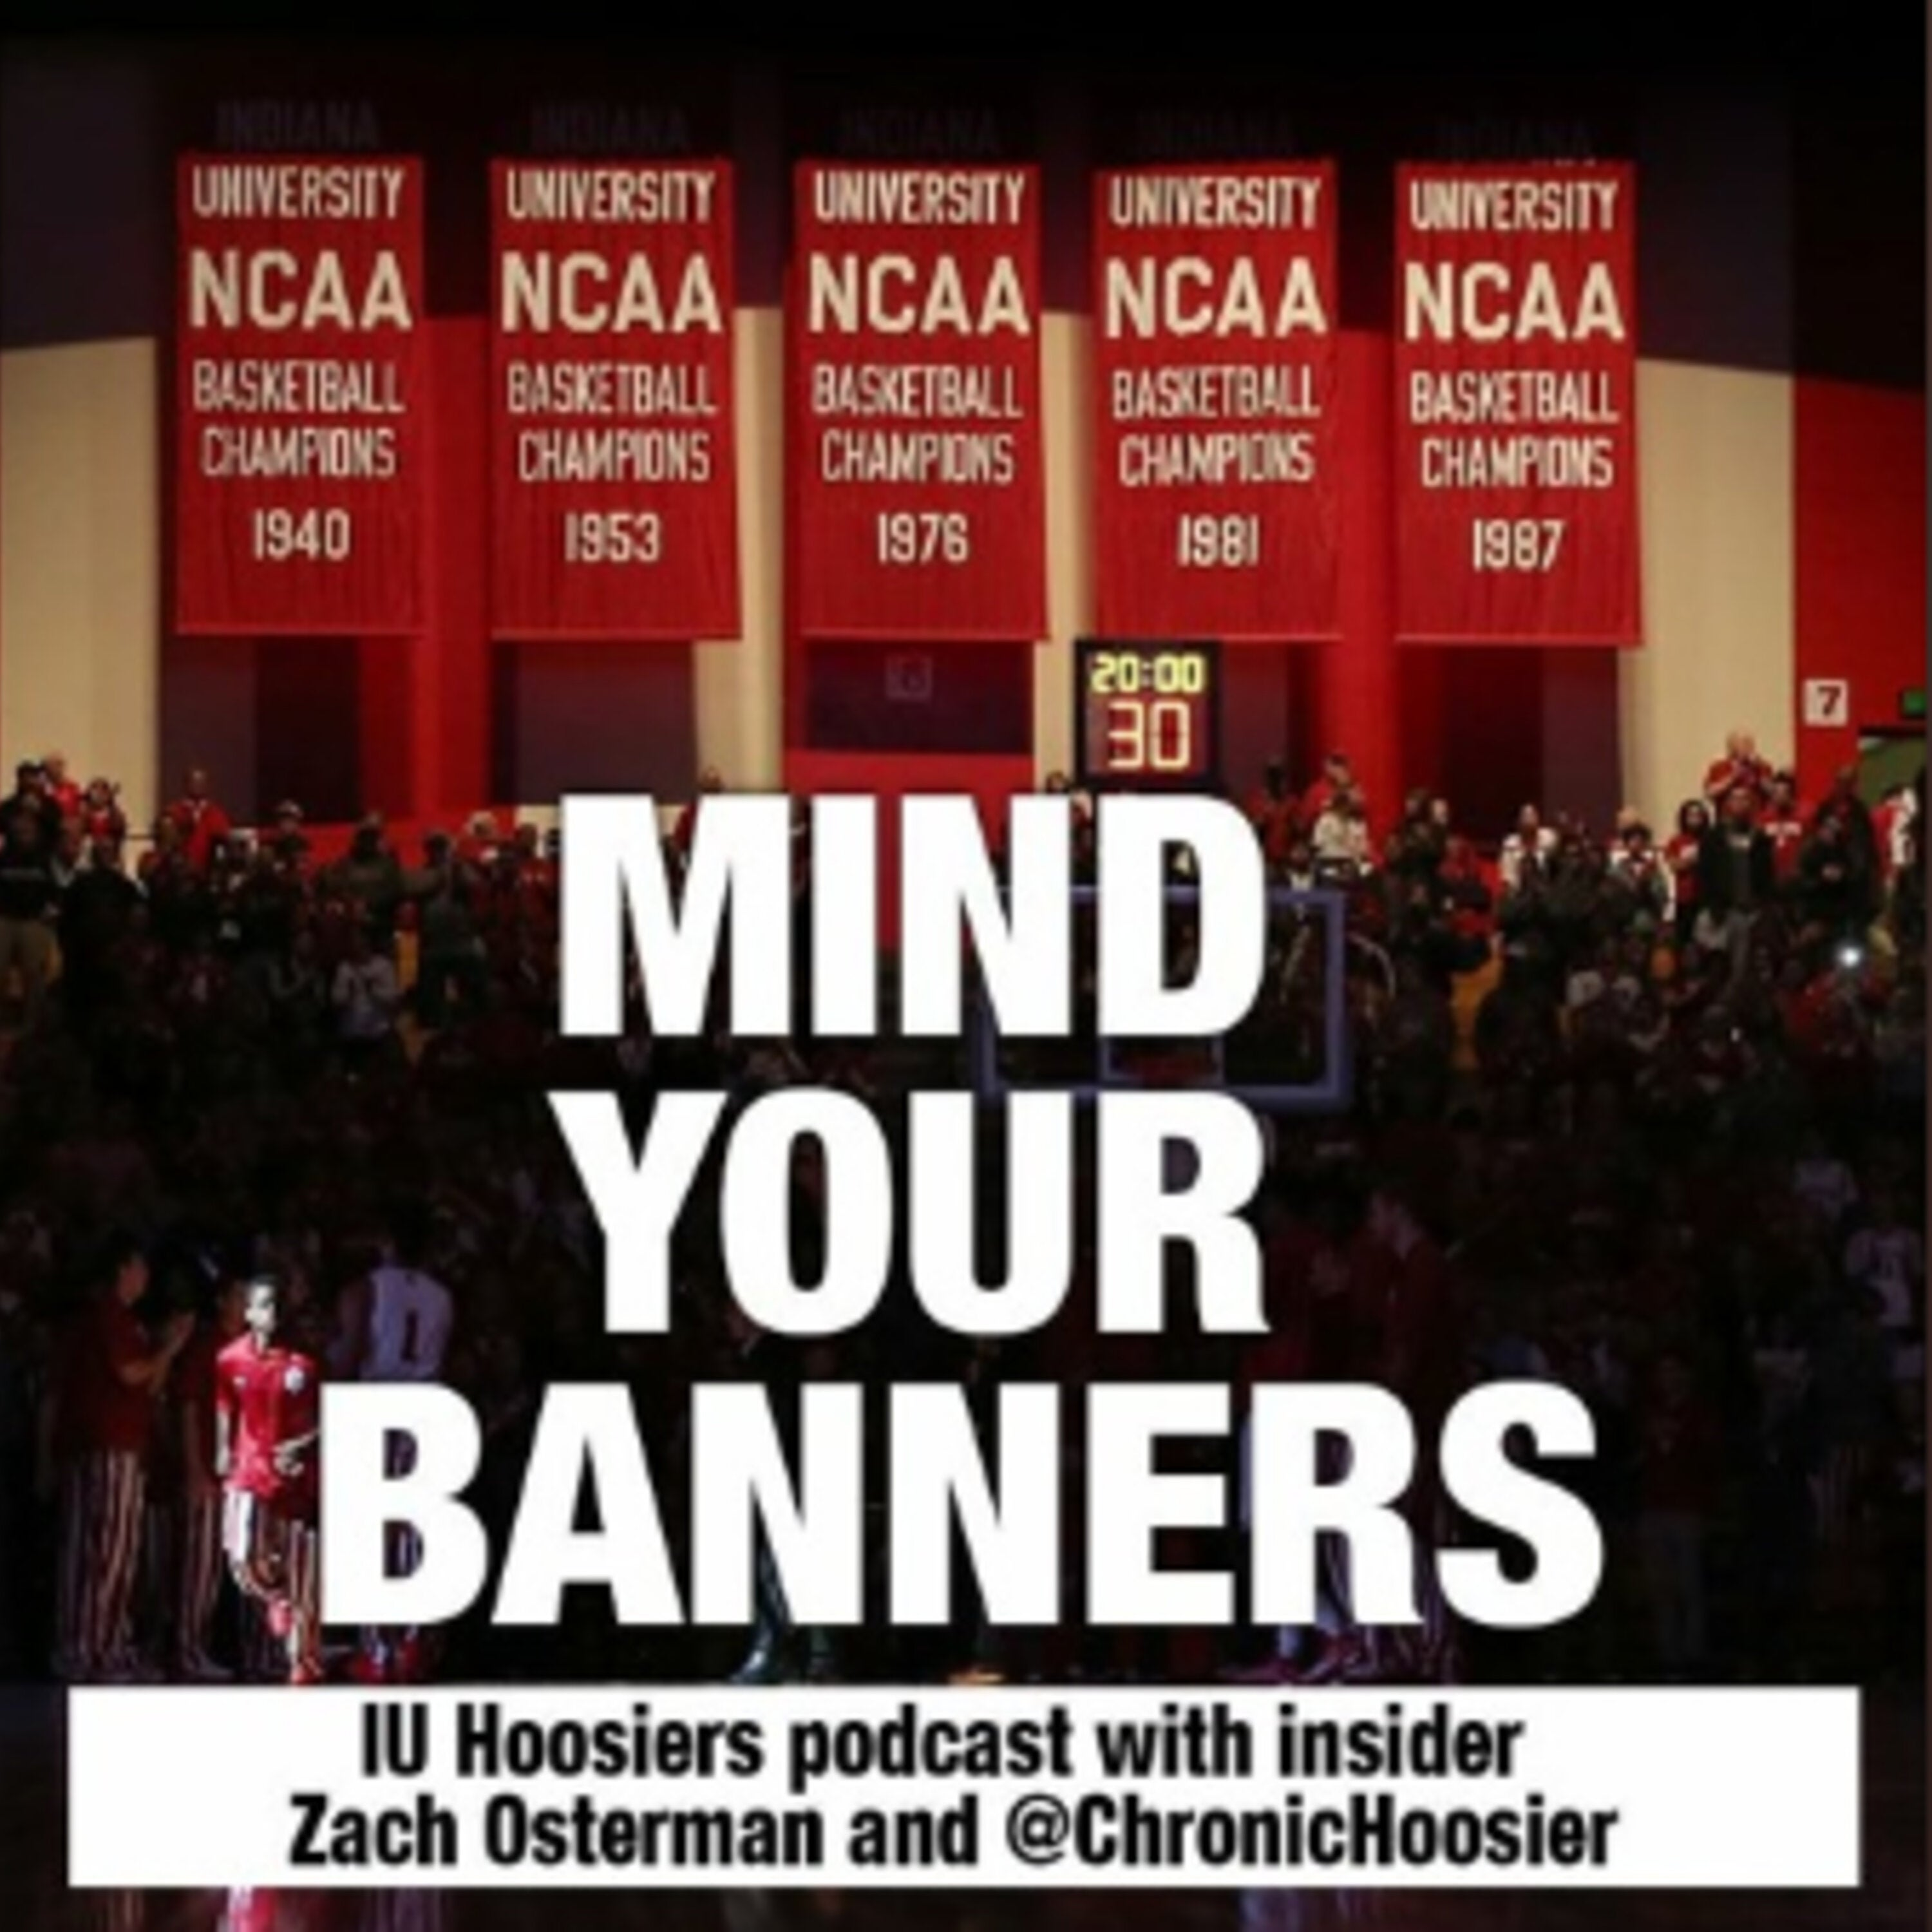 Mind Your Banners: Mike Woodson preps for Kansas, while Curt Cignetti hits the portal